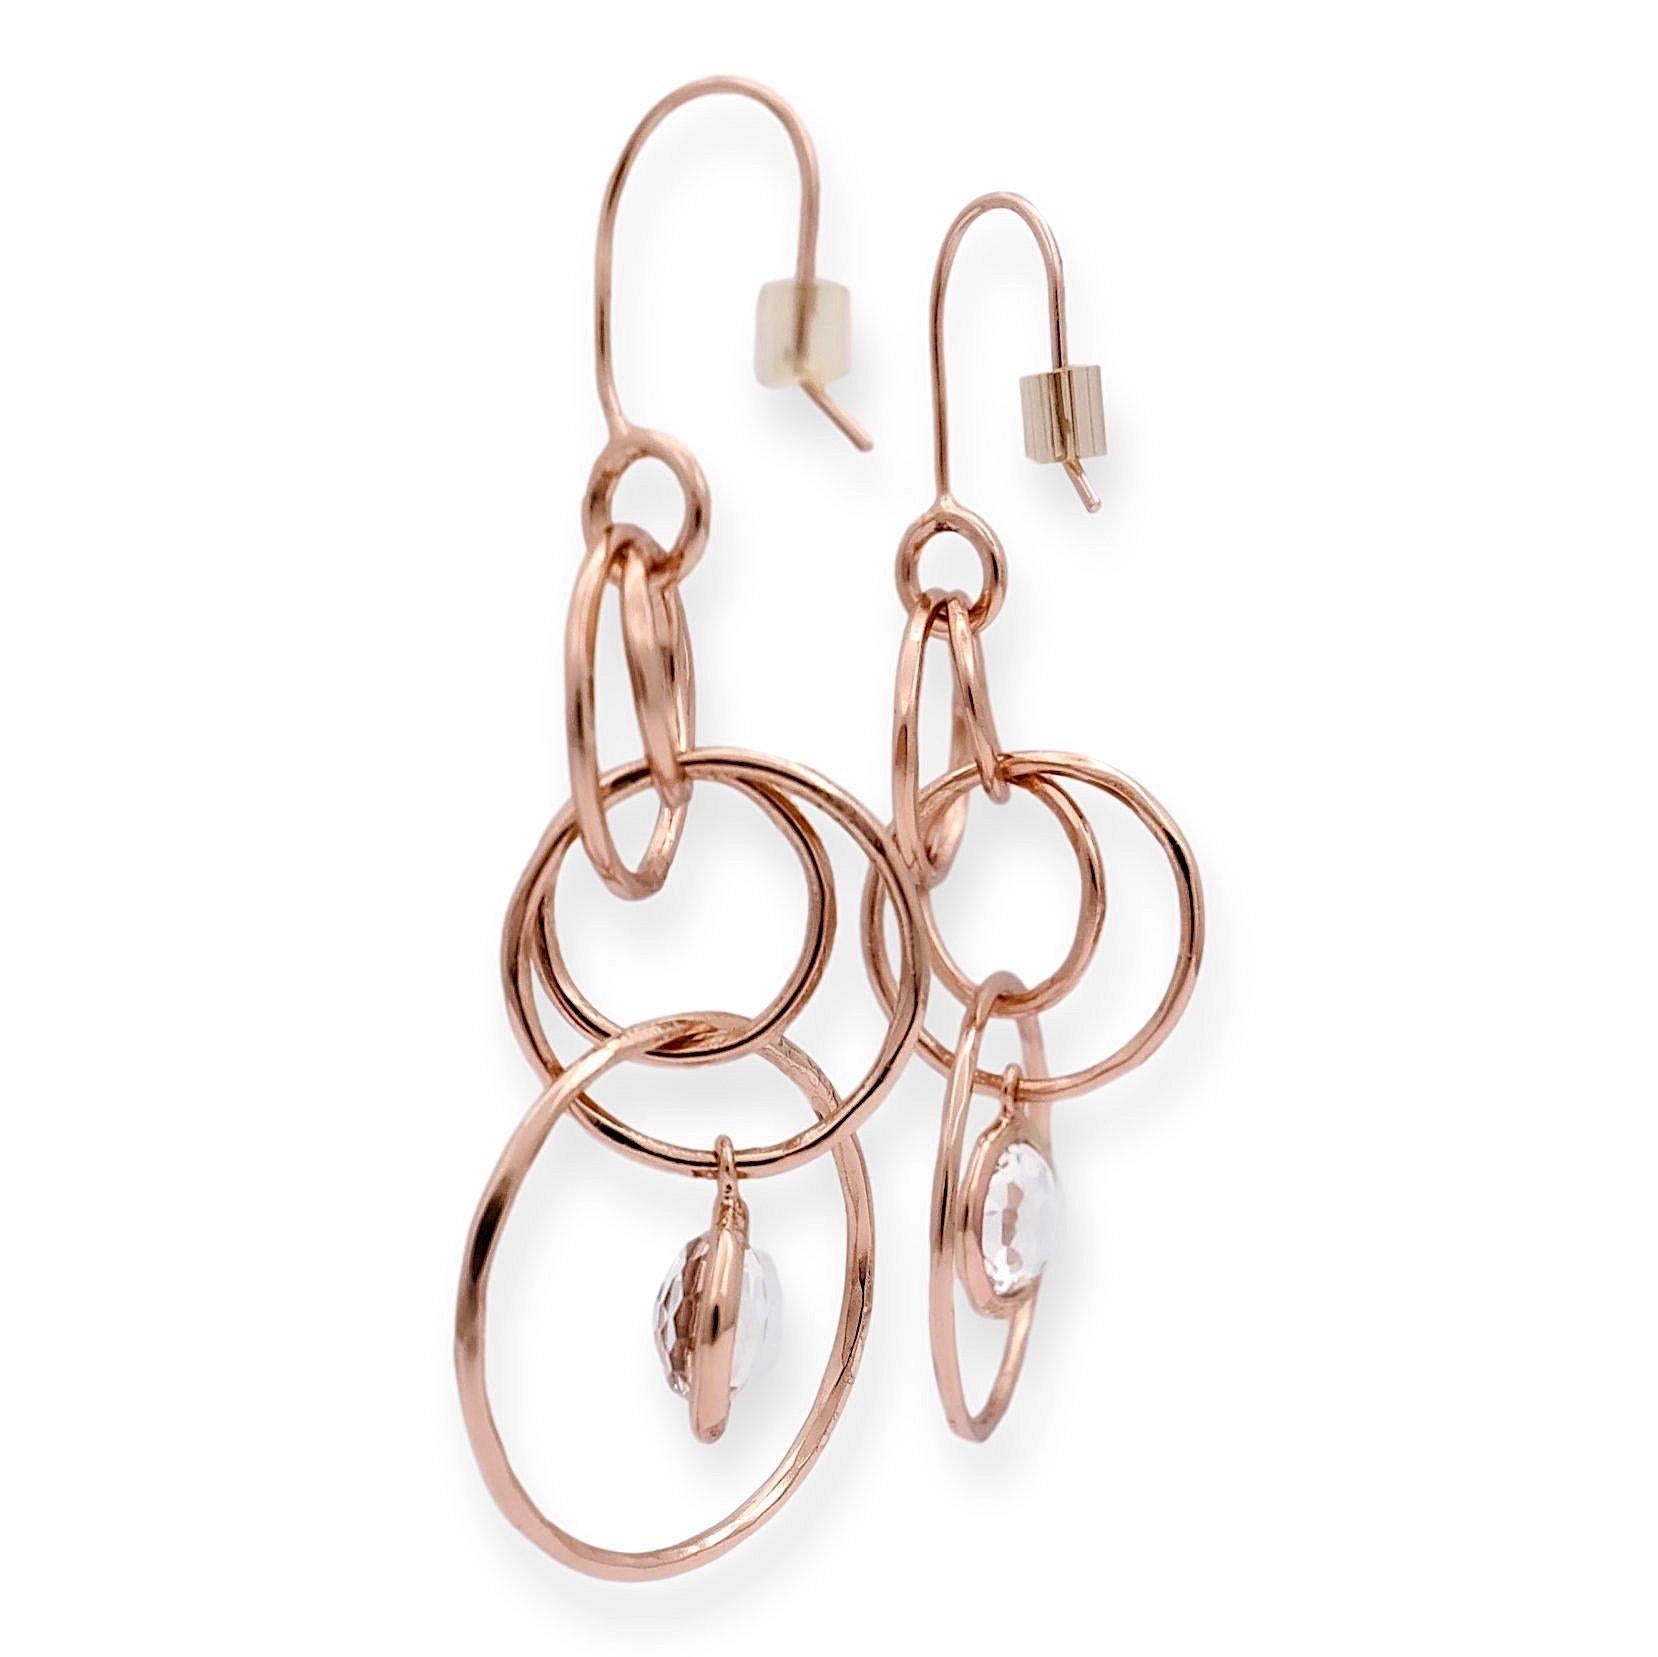 IPPOLITA's exquisite earrings: Rose gold vermeil and sterling silver intertwining hoops, showcasing stunning rock crystal centers in a bezel setting. Effortlessly elegant with a secure wire hook closure. Fully hallmarked with logo and metal